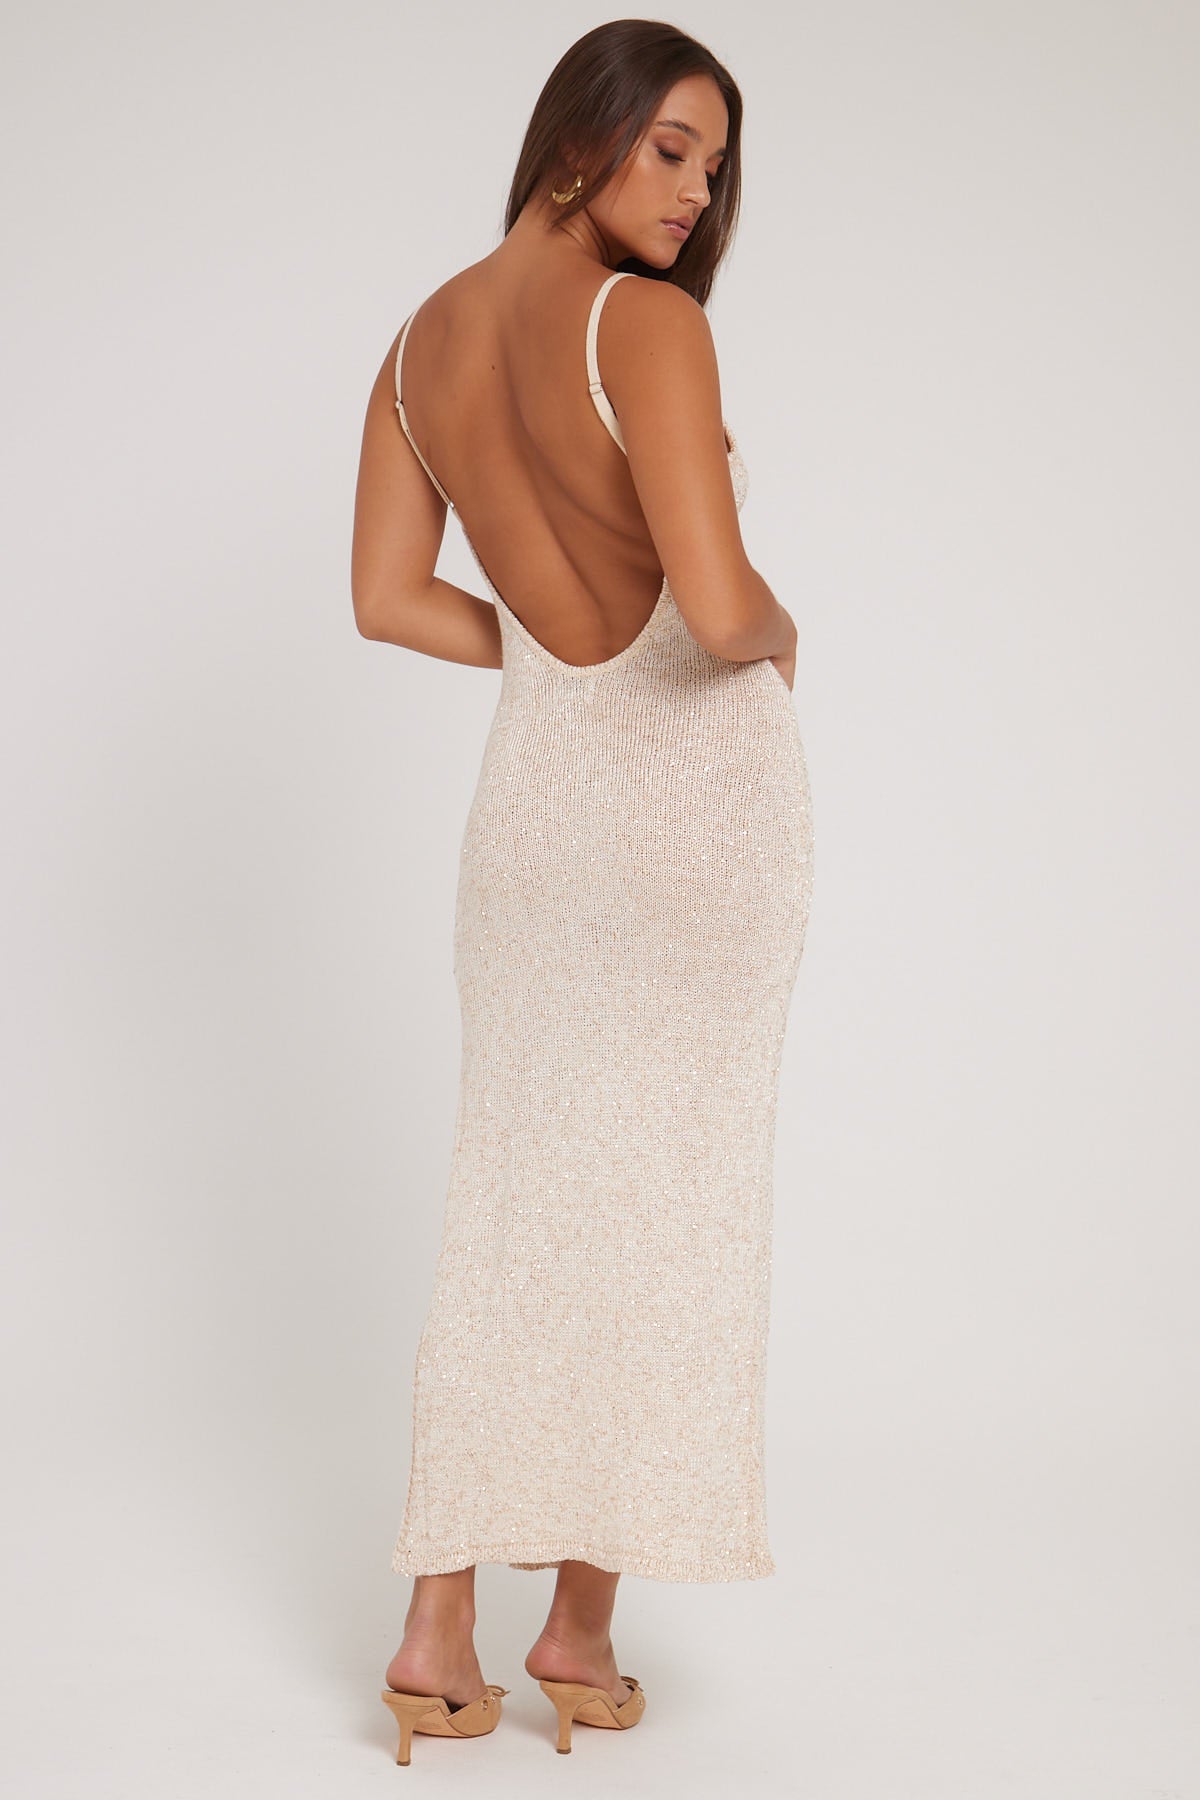 Sndys The Label Azaria Maxi Dress Champagne Shimmer